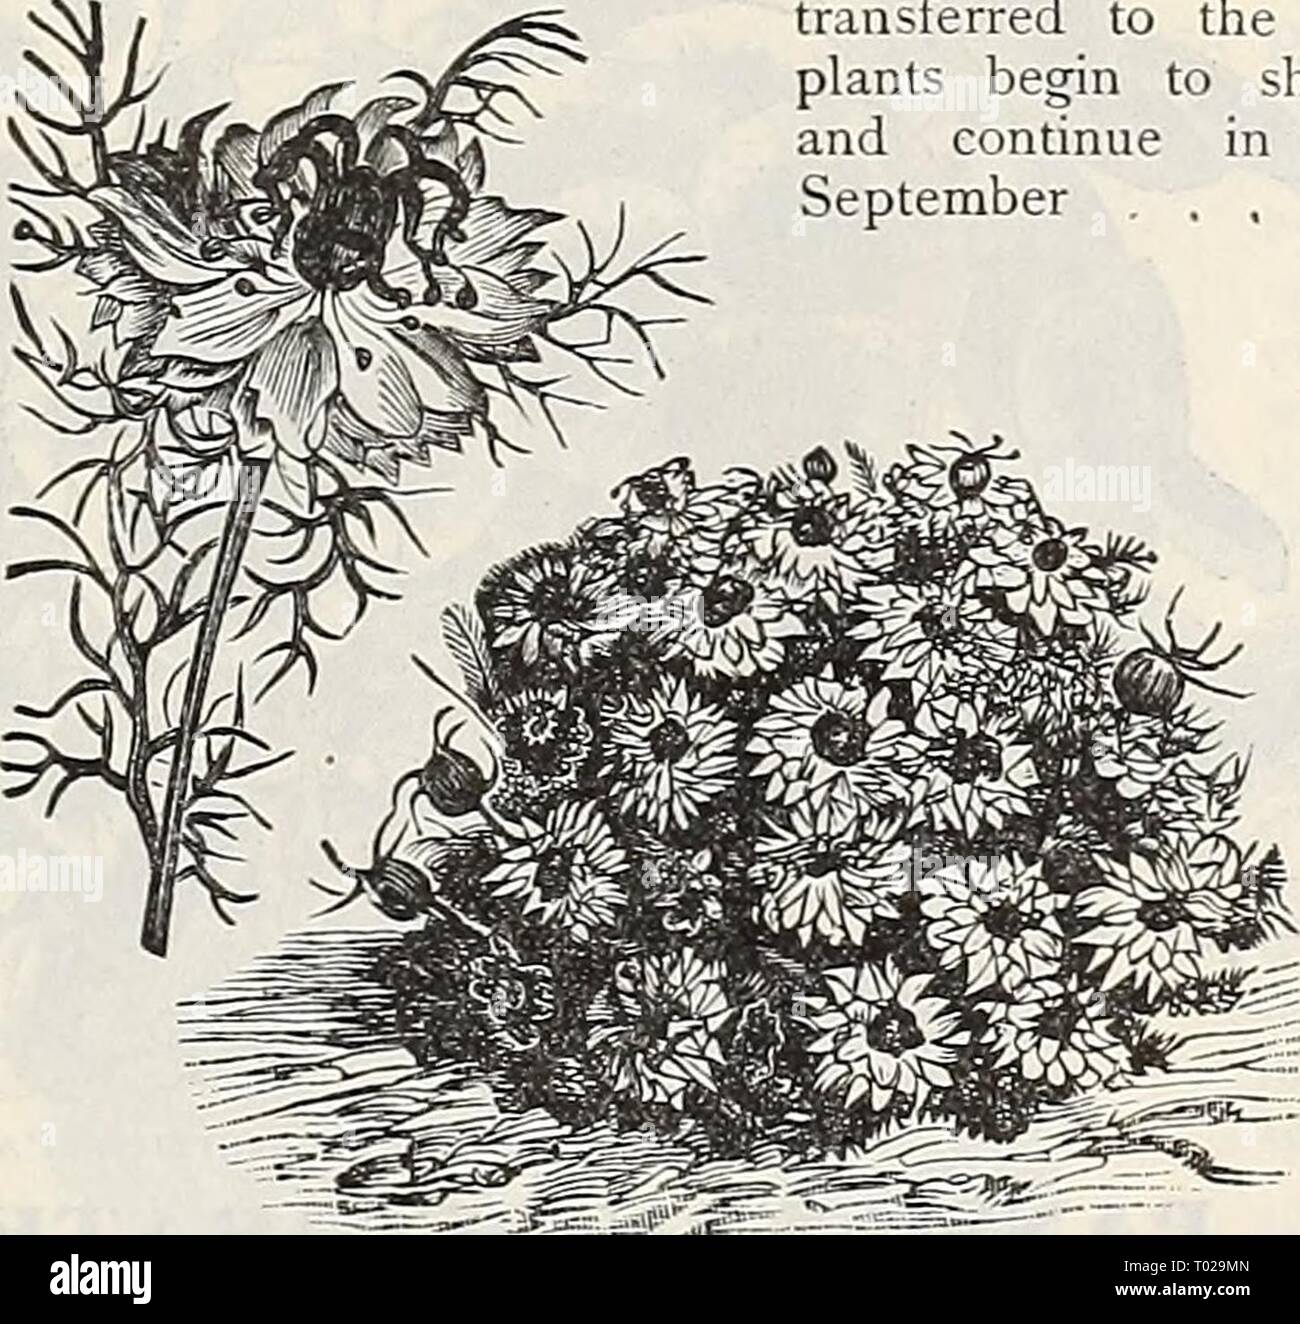 Dreer's garden calendar : 1899 . dreersgardencale1899henr Year: 1899  Lobb's Nasturtium. Lobb's Nasturtium. iTropseolum Lobbianum.) The brilliance and profusion in blooming of the Lobbianum varieties render them superior for greenhouse or conservatory decoration in Winter ; also for trellises, arbors and vases, etc., in Summer; half-hardy-annuals; 6 to 10 feet. (See cut.) per pkt. G171 Brilliant. Dark scarlet 5 6165 Spitfire. Brilliant, light scarlet .' 5 6172 Roi des Noirs. Black maroon 5 6174 Asa Gray. Primrose yellow 10 6176 Crown Prince of Prussia. Deep blood red 5 6173 Giant of Battles. S Stock Photo